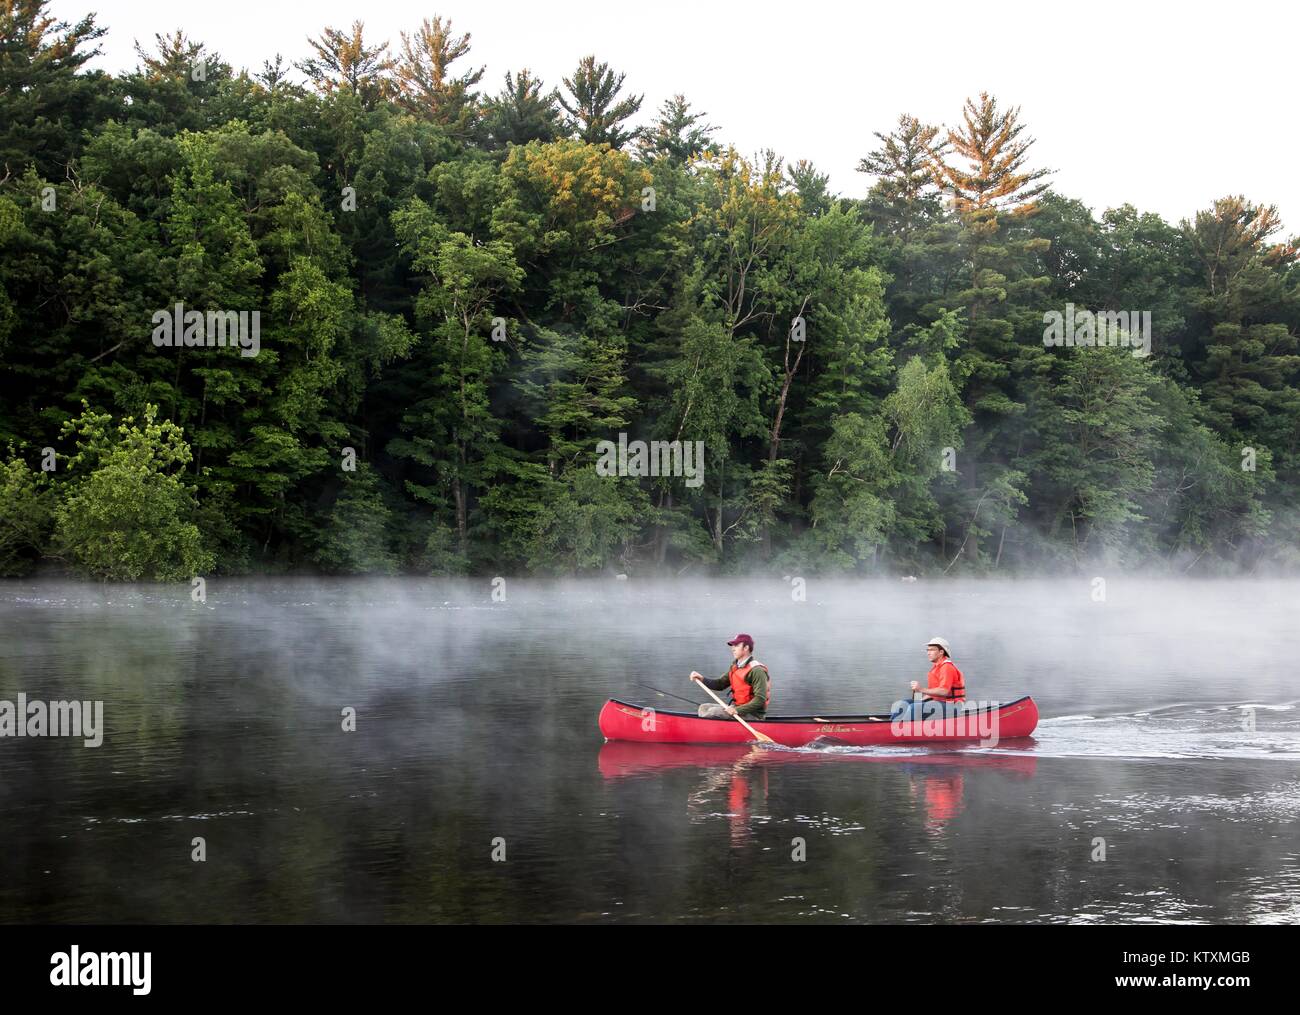 Tourists canoe down the Wisconsin Recreational River June 21, 2017 in Wisconsin. Stock Photo